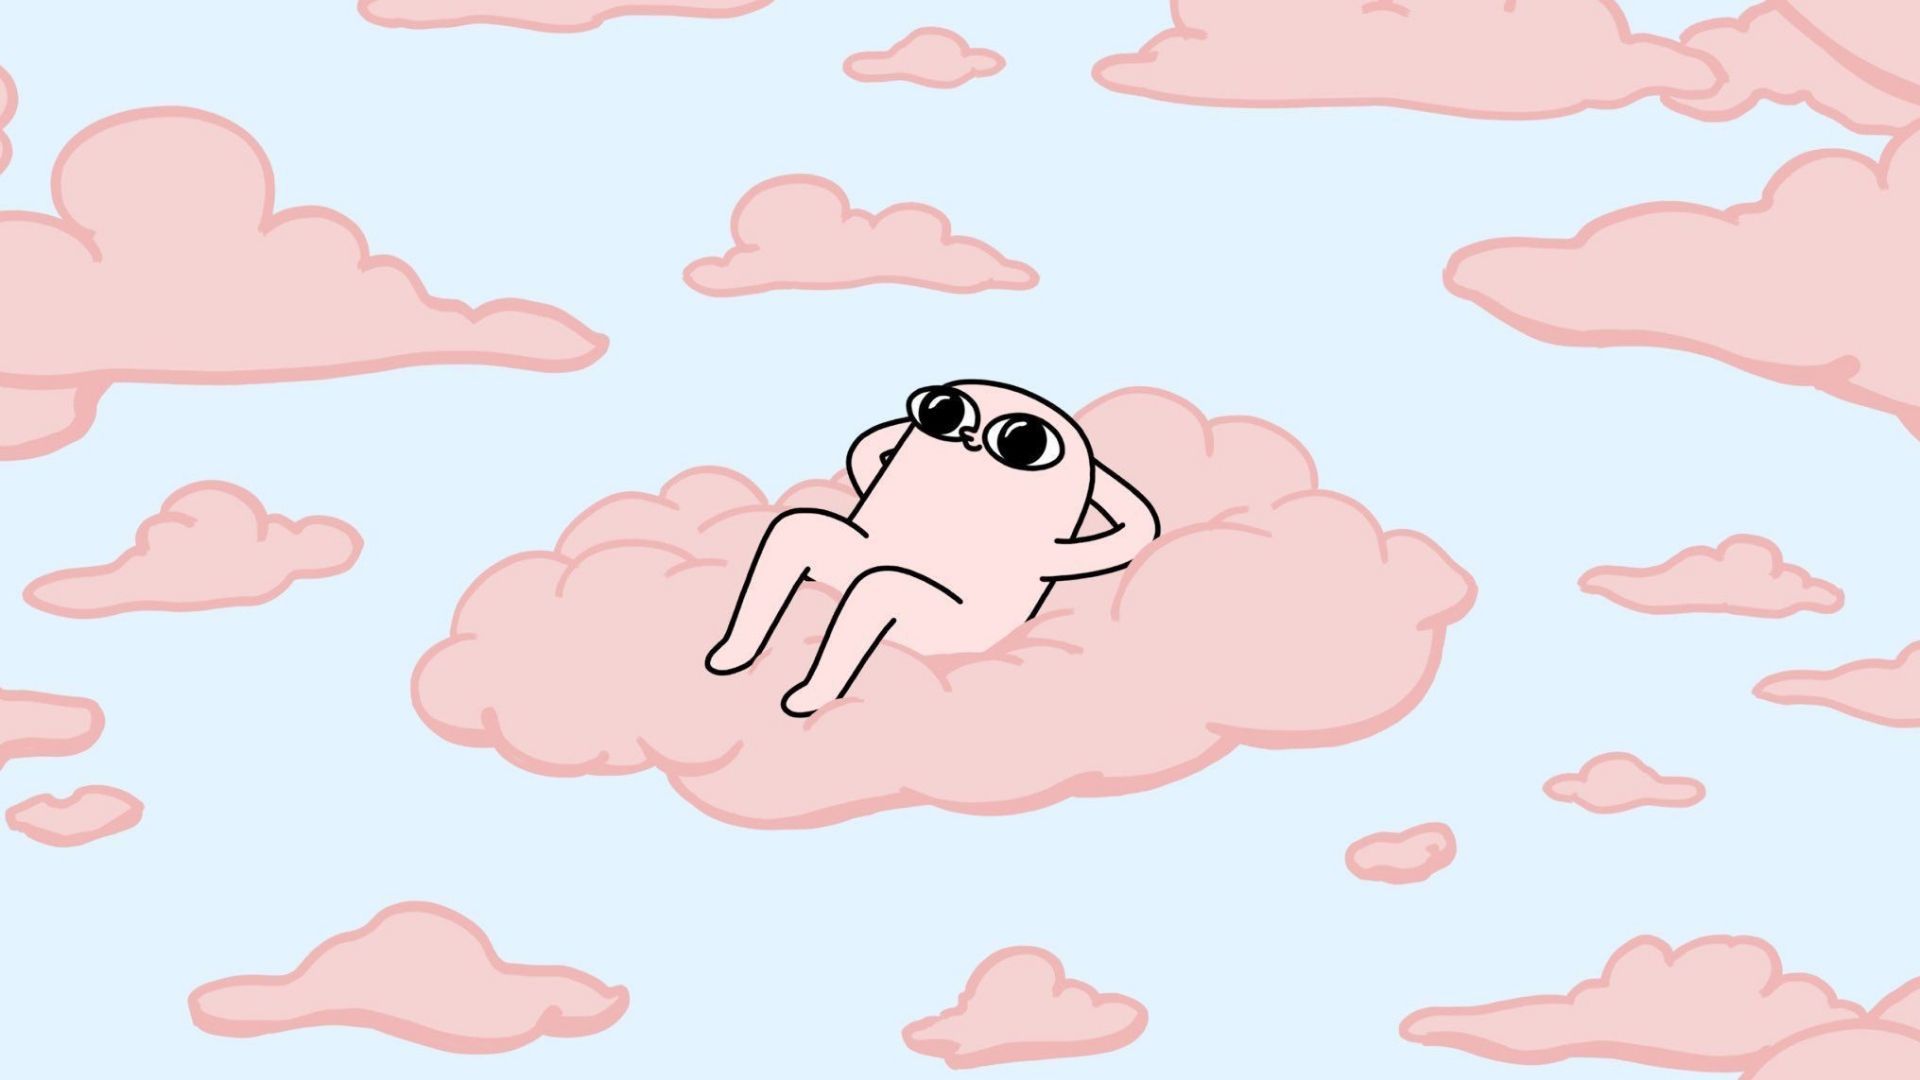 A cartoon character is sitting on top of clouds - 2000s